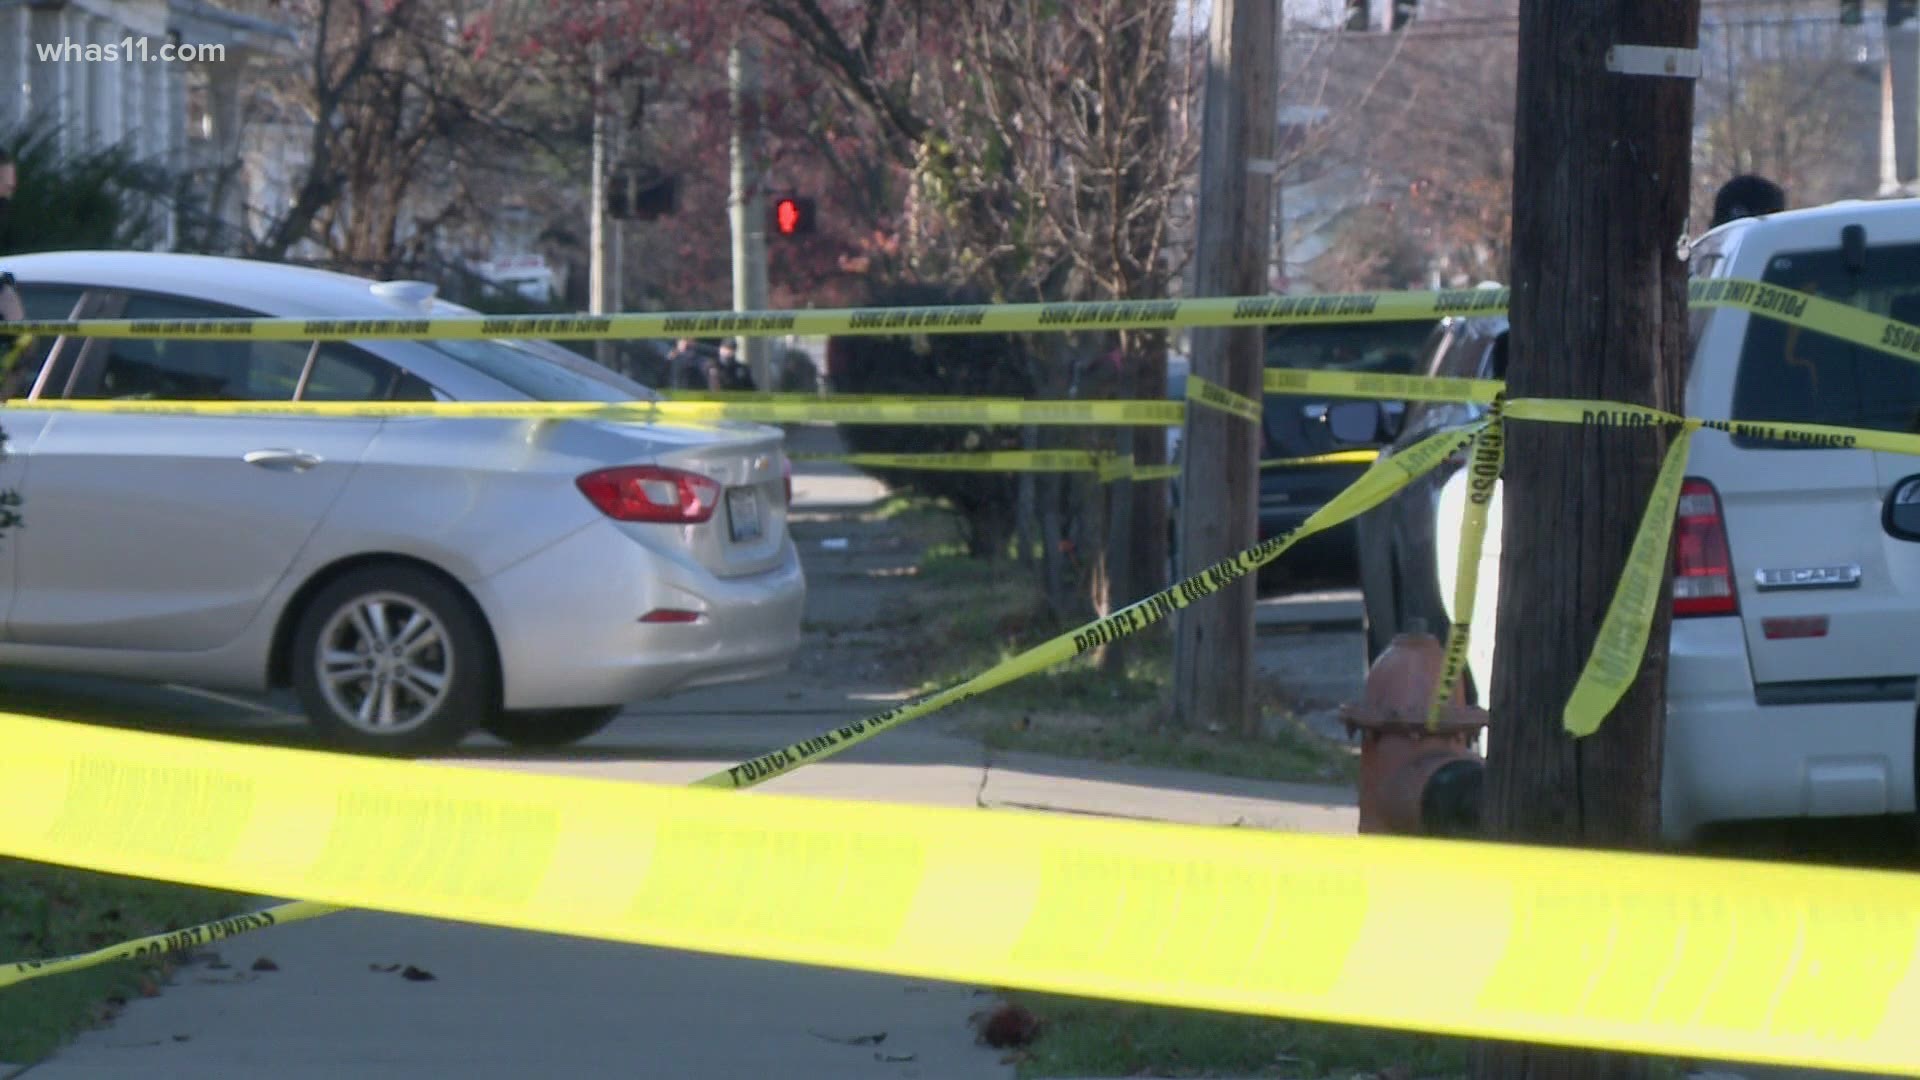 Police said the woman and child were shot near the intersection of Dr. W.J. Hodge Street and West Oak Street Saturday afternoon.